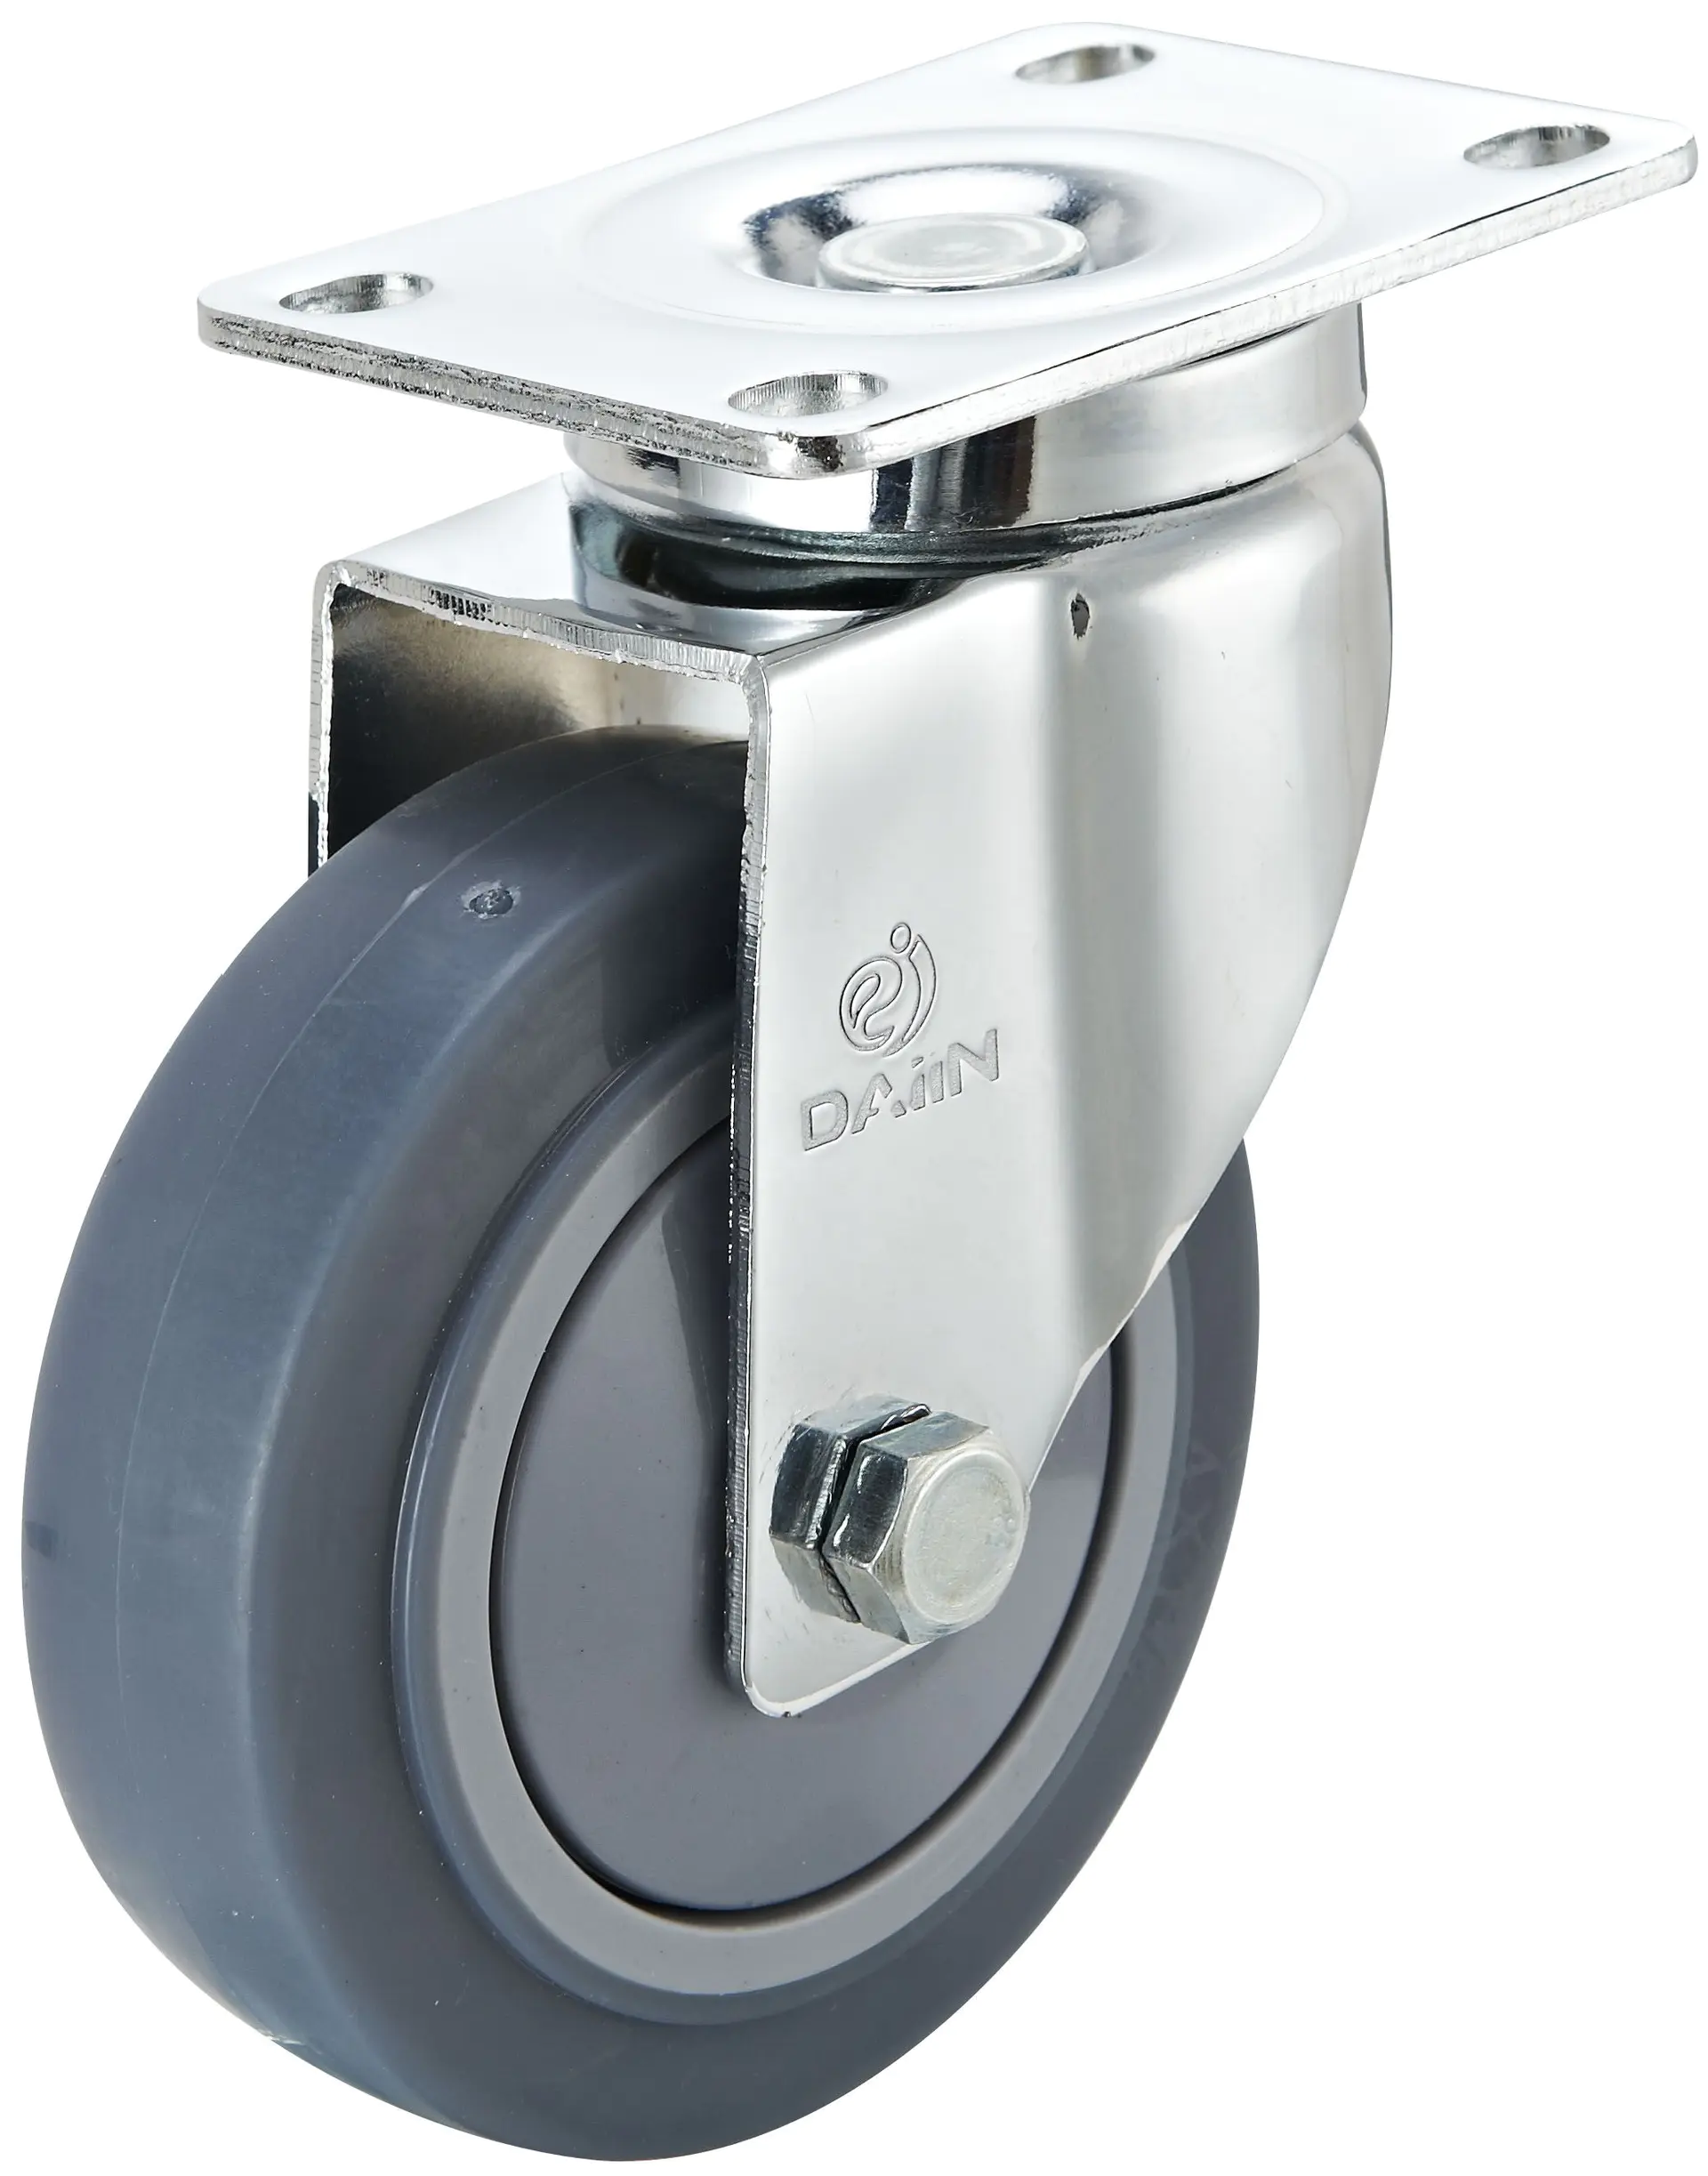 4 Inch Top Plate Trolley Wheel With Bearing Industrial Castering Equipment Platform Heavy Duty Trolley Cart Caster Wheels